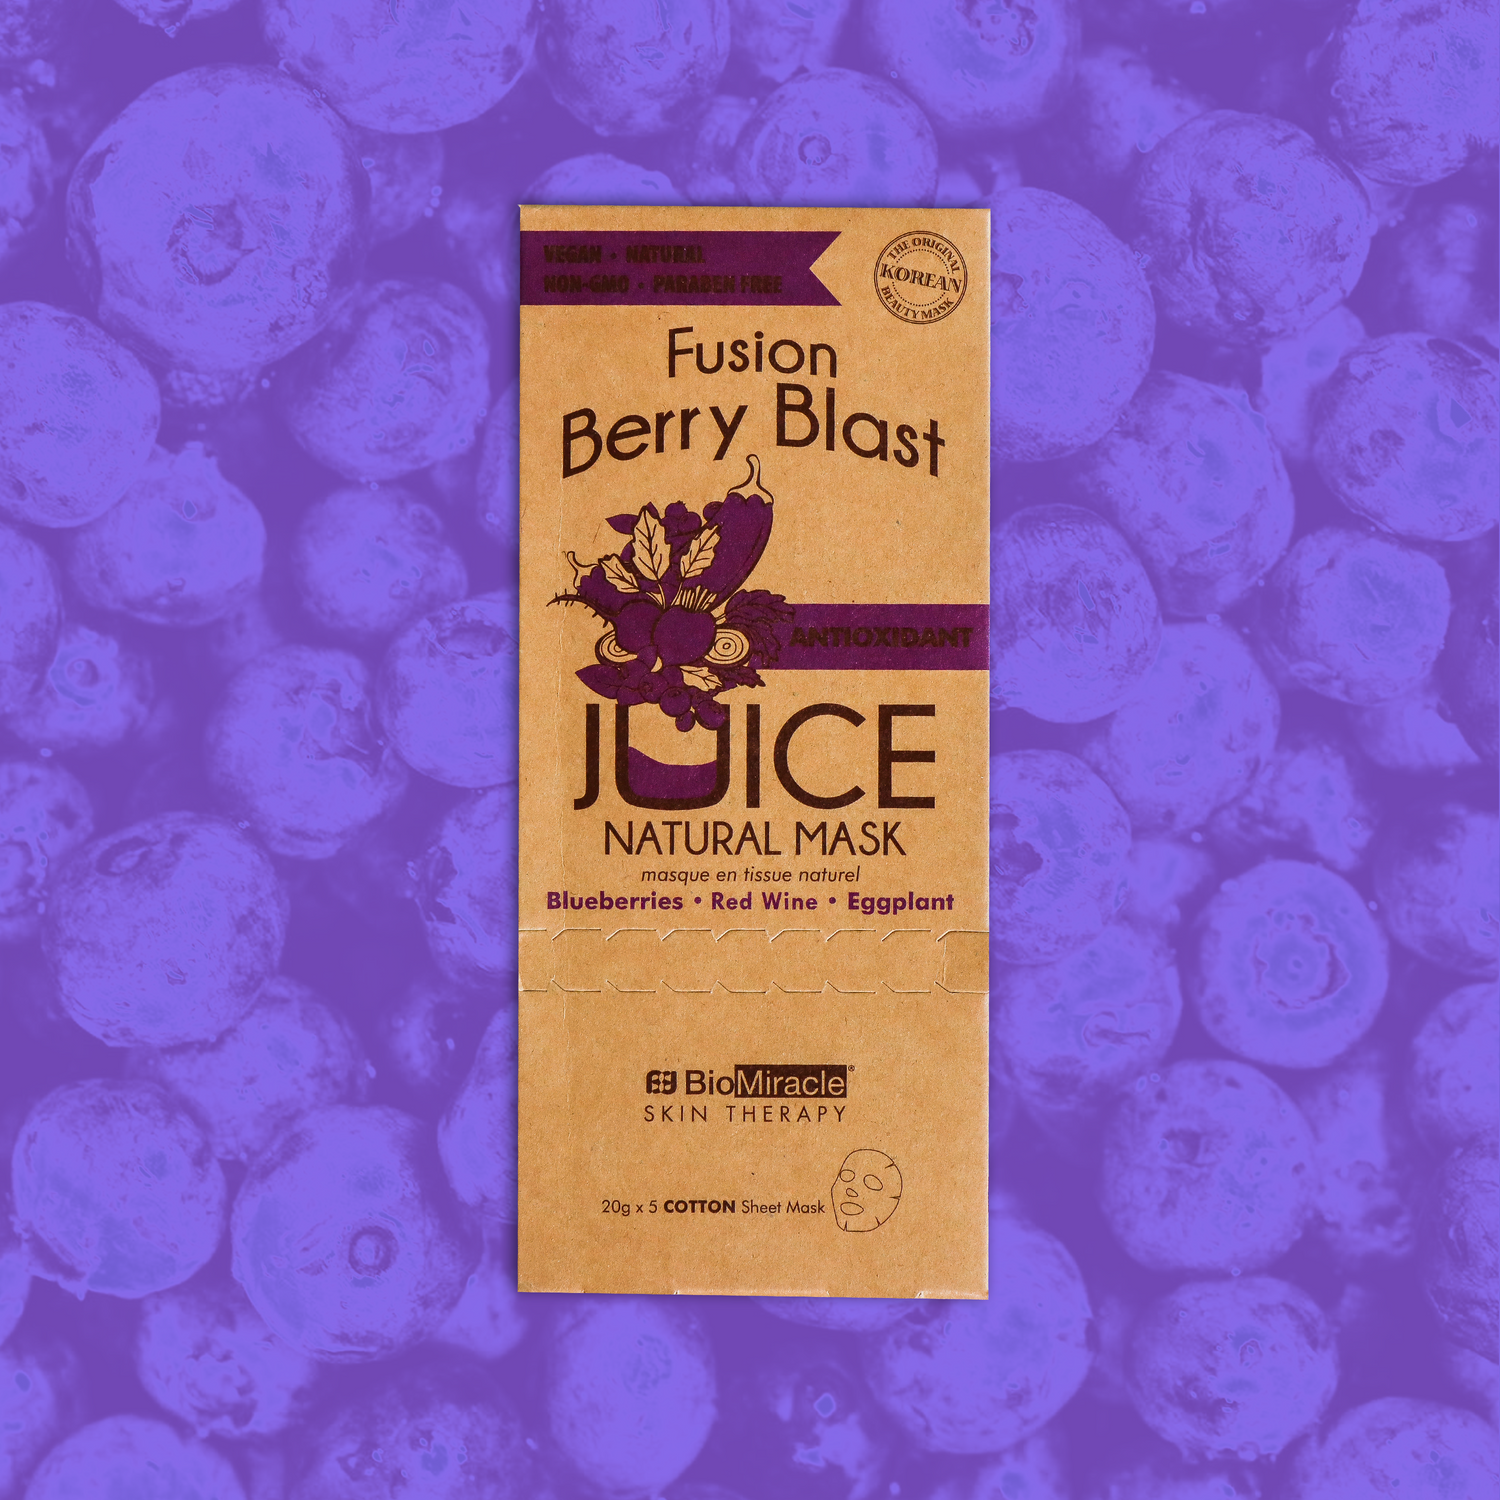 Fusion Berry Blast Antioxidant Juice Natural Mask 5 pack